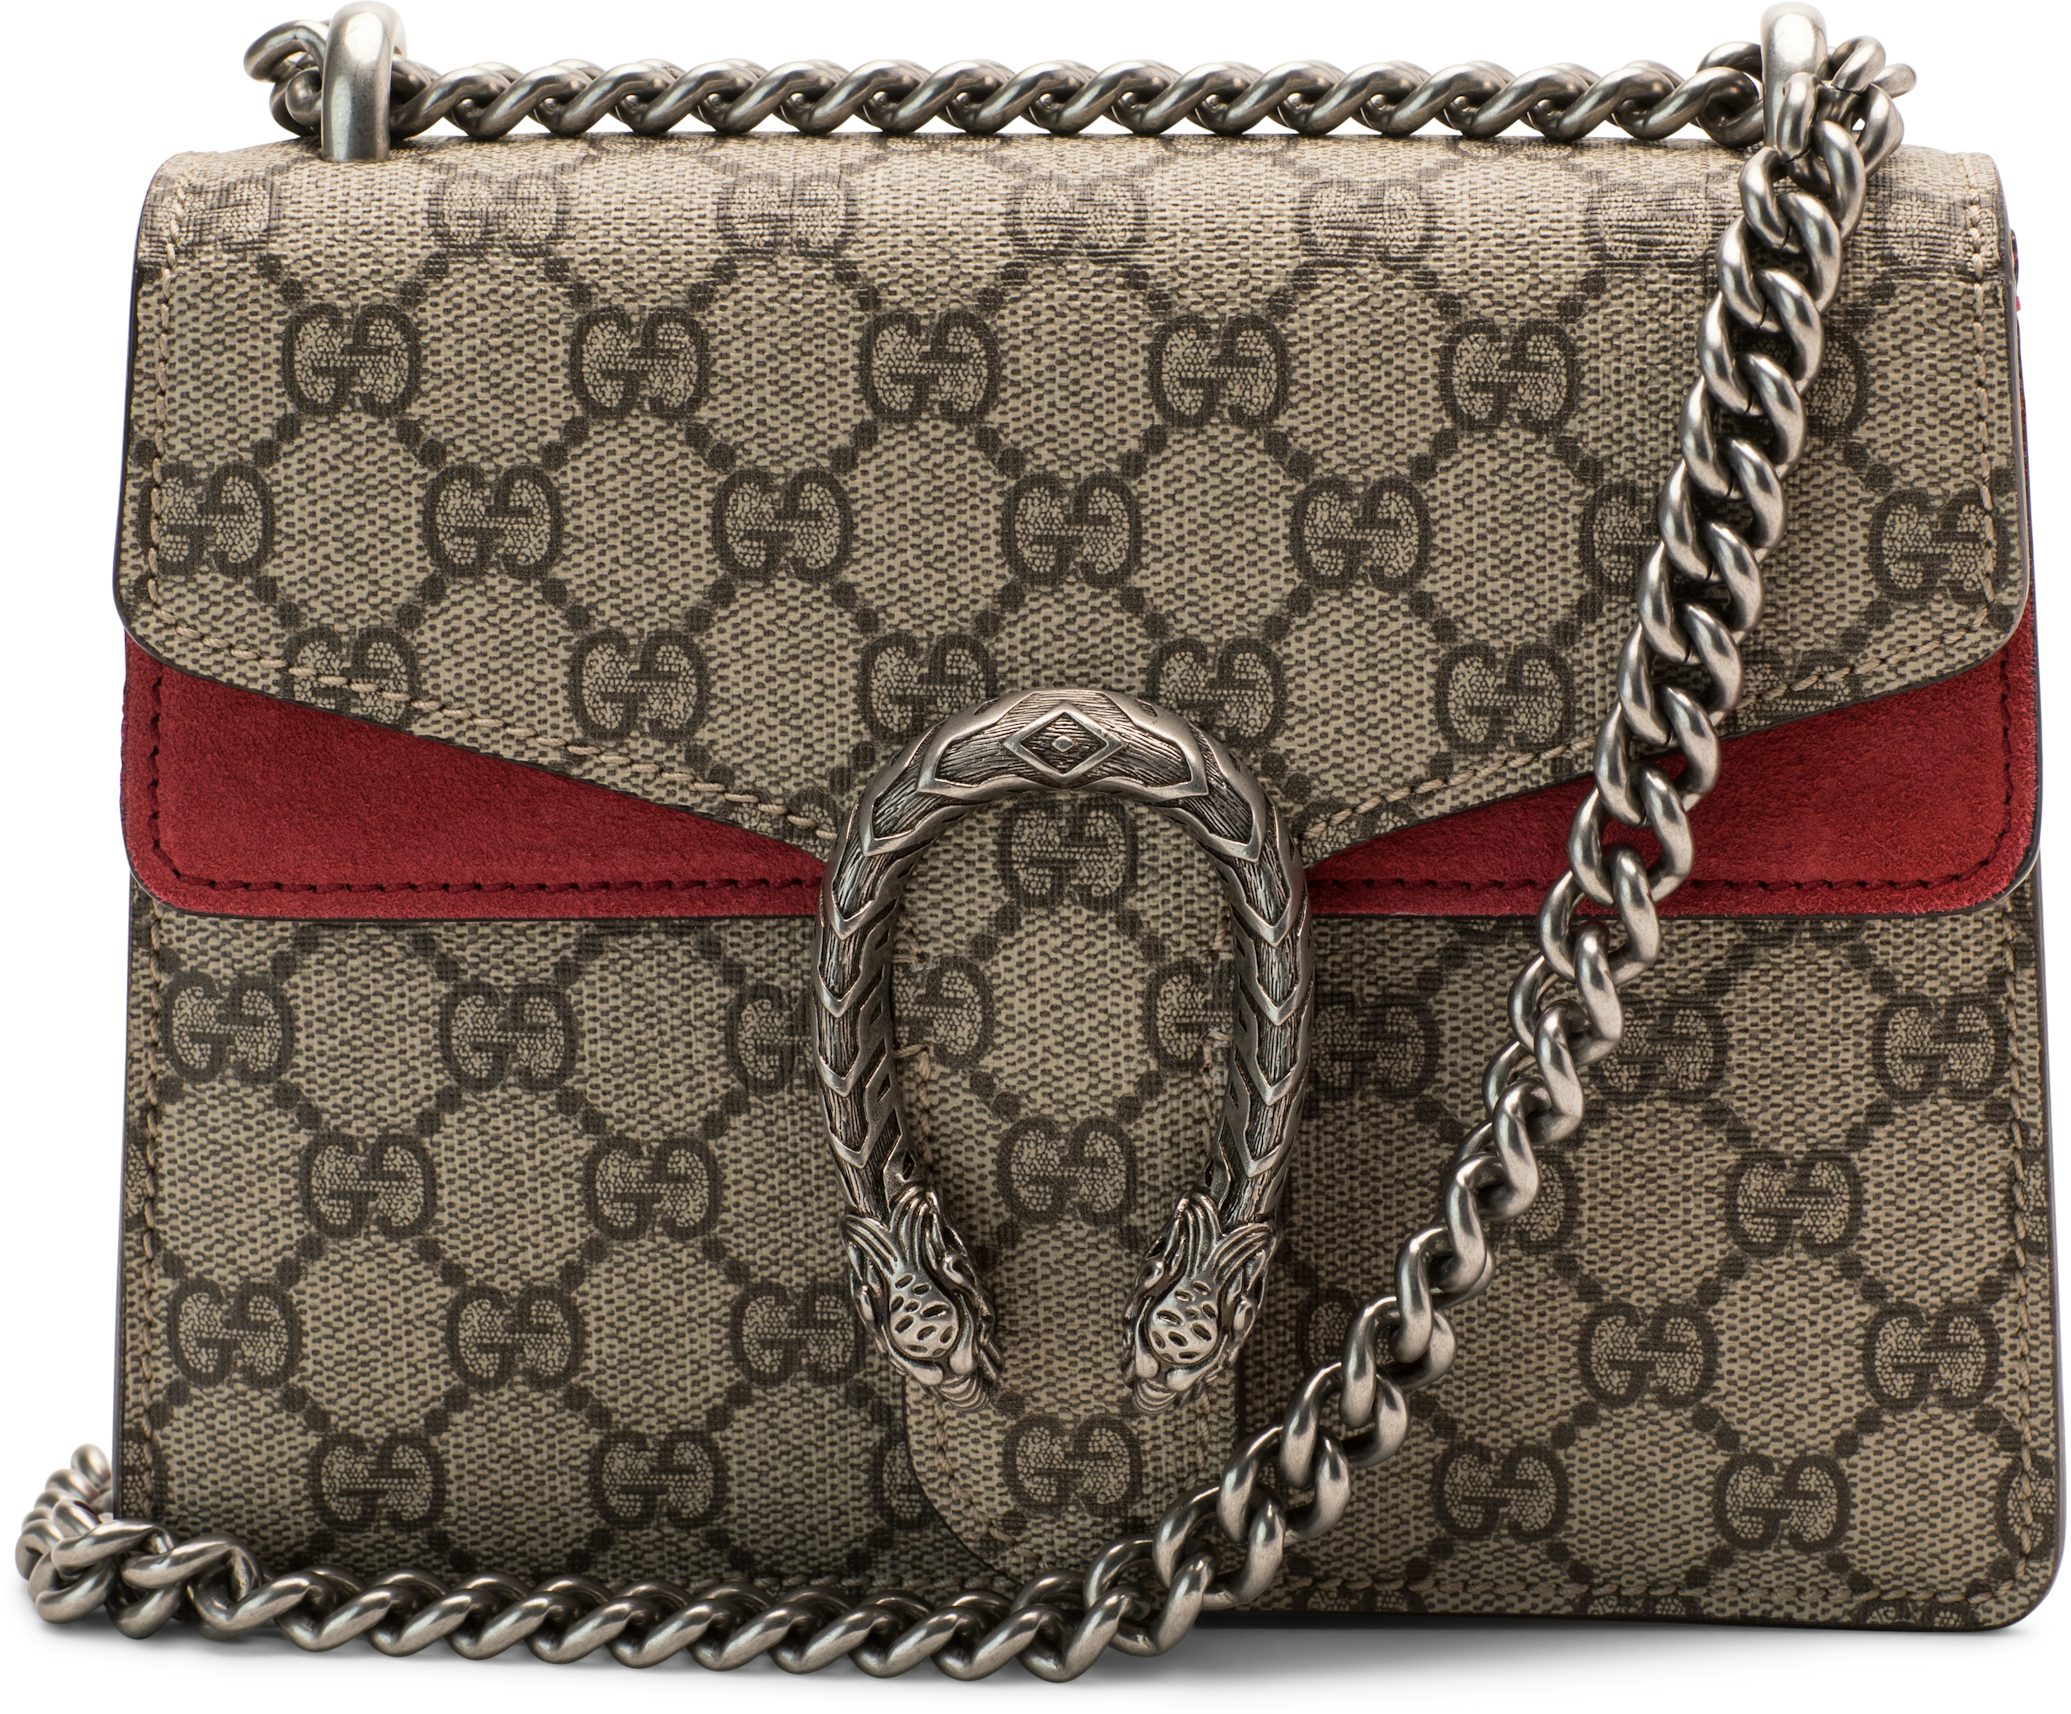 Dionysus GG Supreme Small Shoulder Bag in Red - Gucci